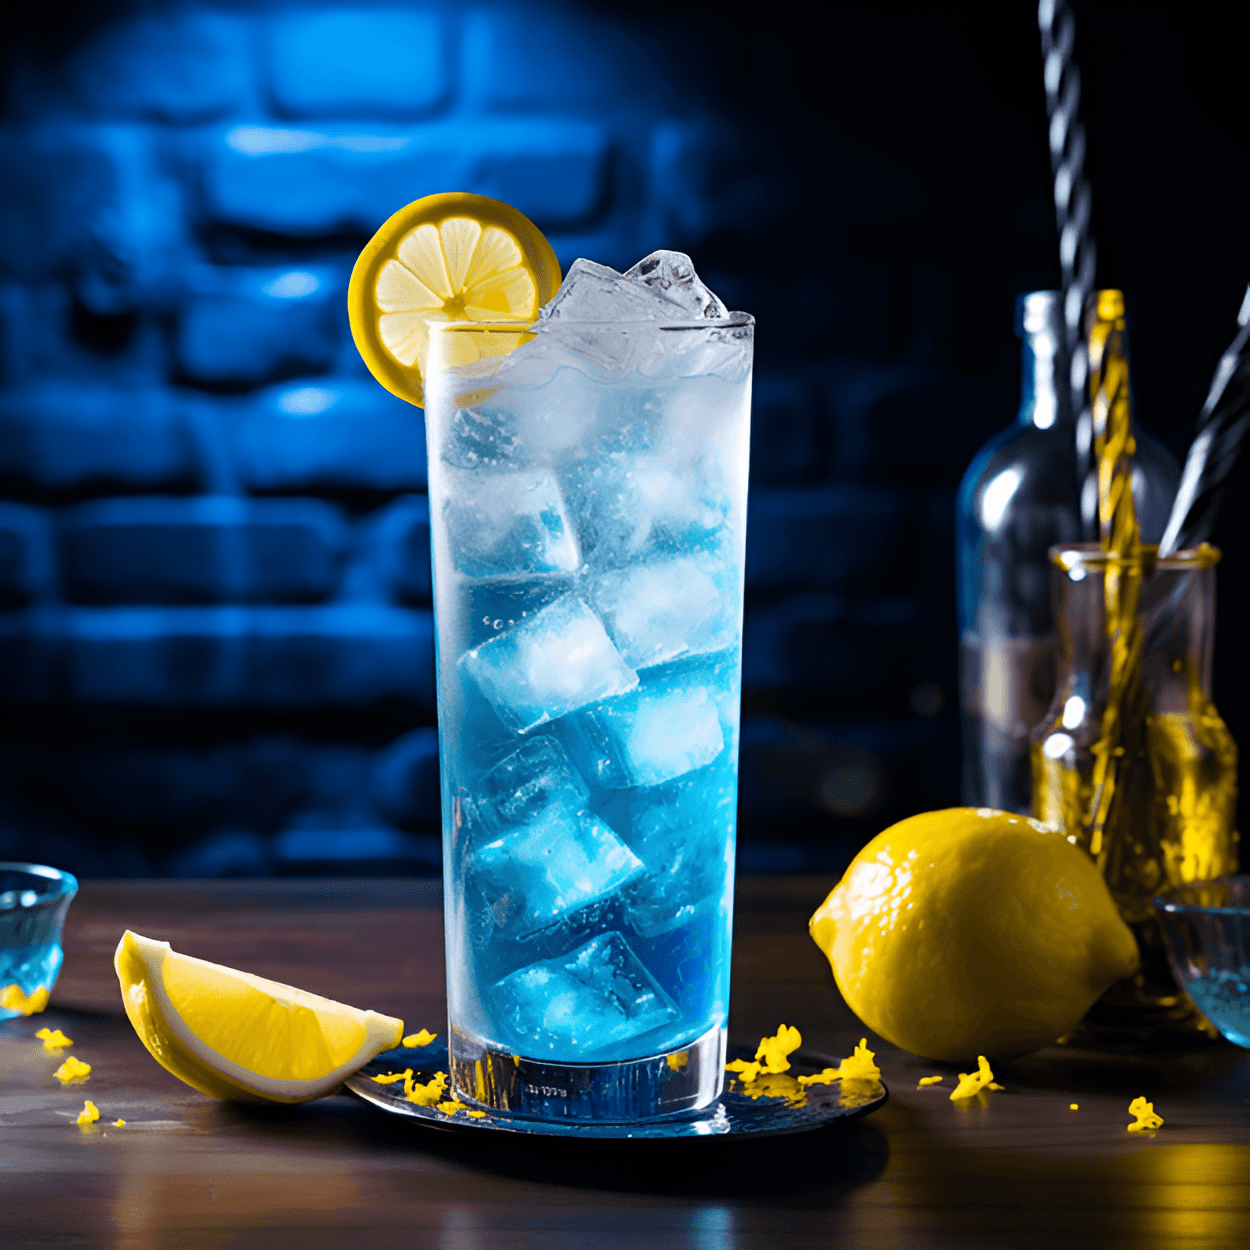 Walk Me Down Cocktail Recipe - The Walk Me Down cocktail is a delightful blend of sweet and sour, with a strong alcoholic kick. The combination of rum, tequila, vodka, gin, and blue curaçao gives it a unique, robust flavor, while the lemon juice and sweet and sour mix balance it out with a refreshing tanginess.